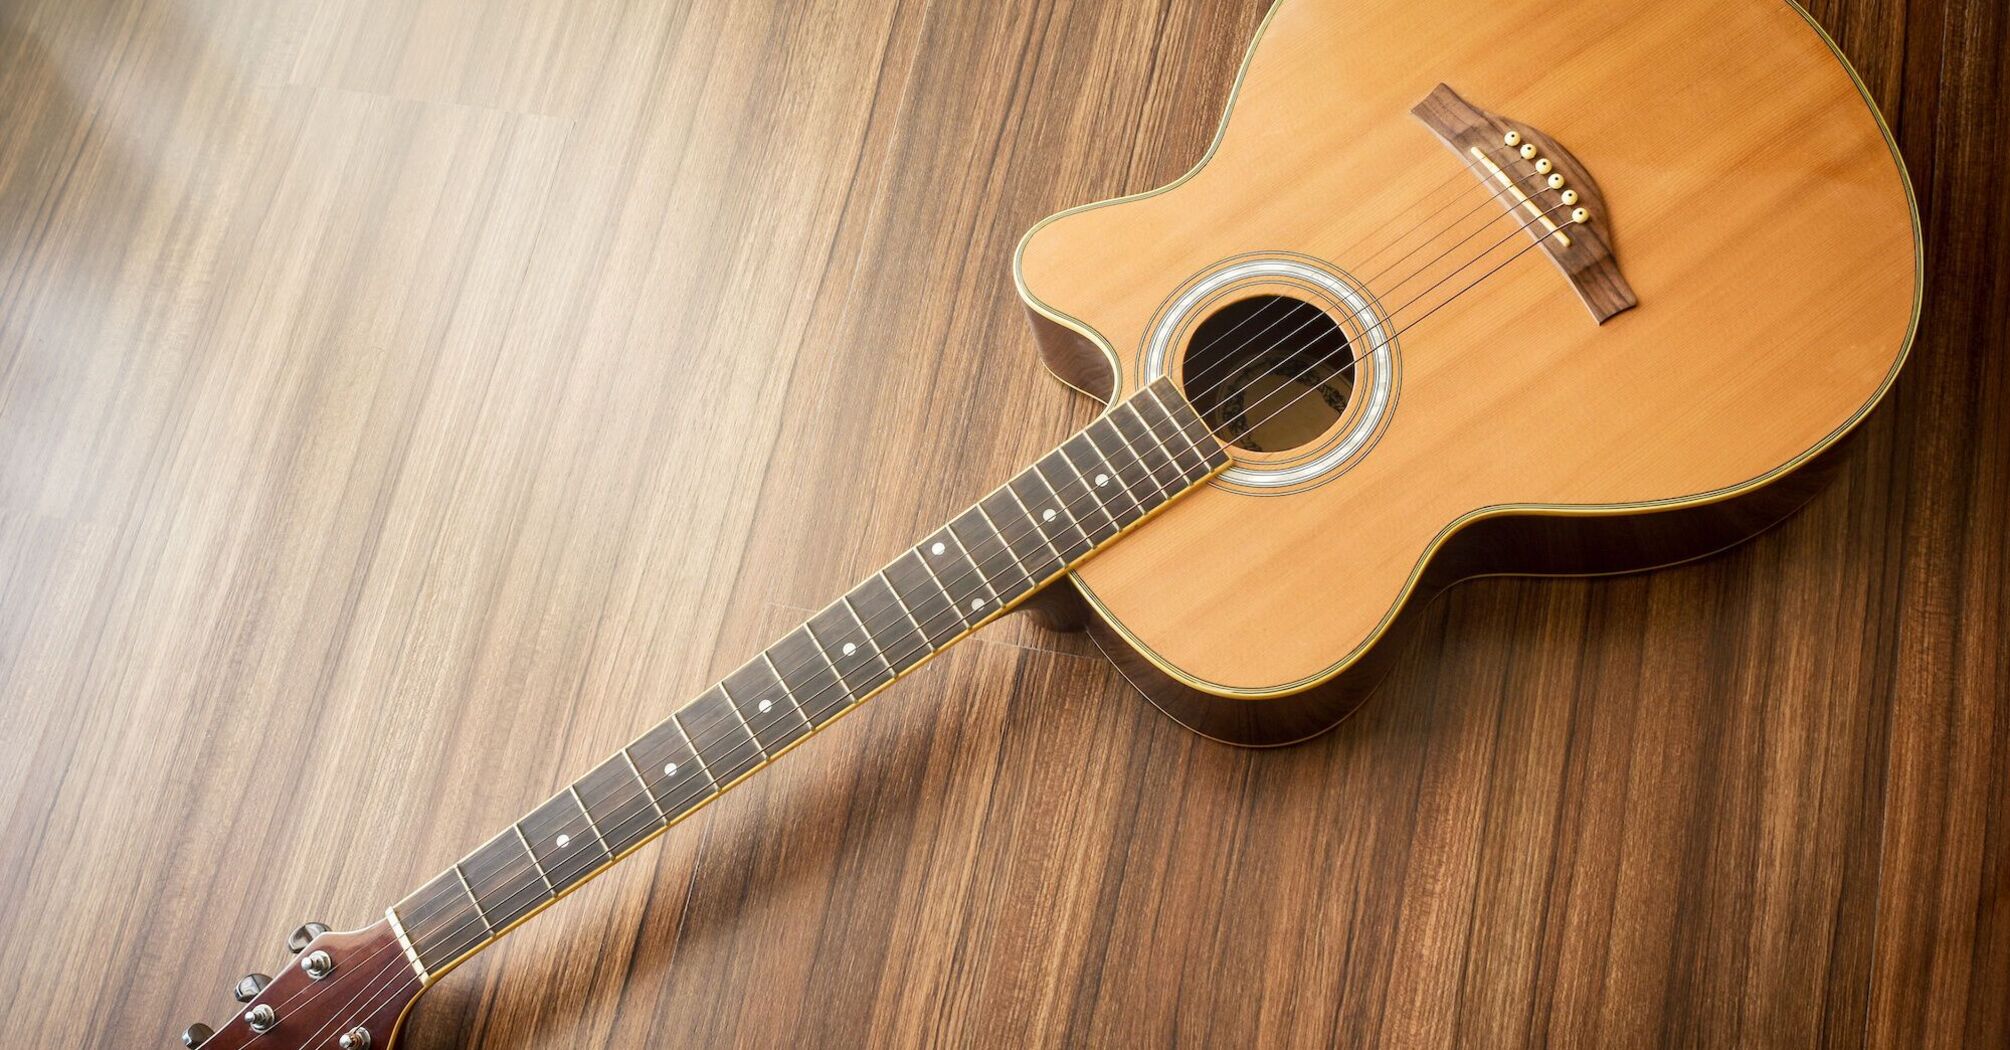 Five facts about the guitar